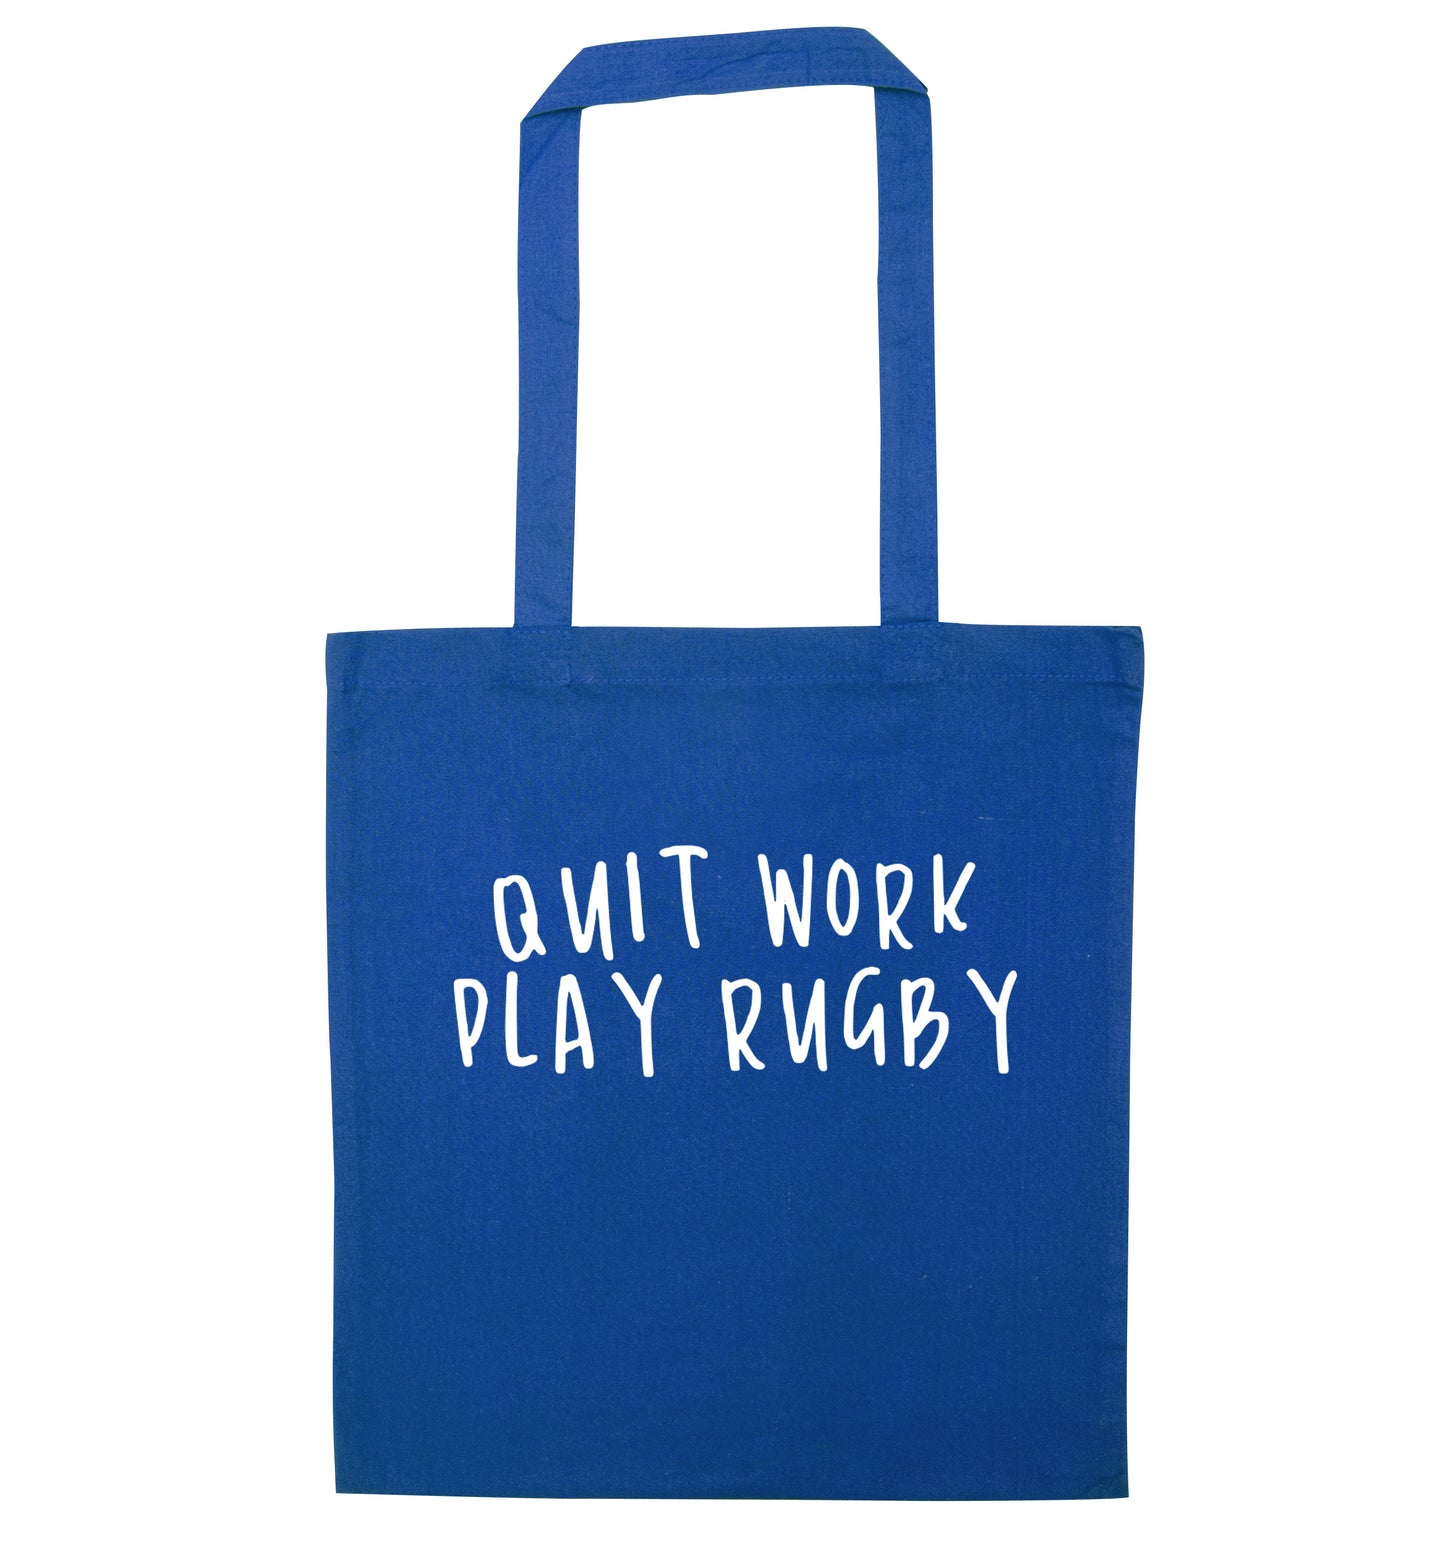 Quit work play rugby blue tote bag